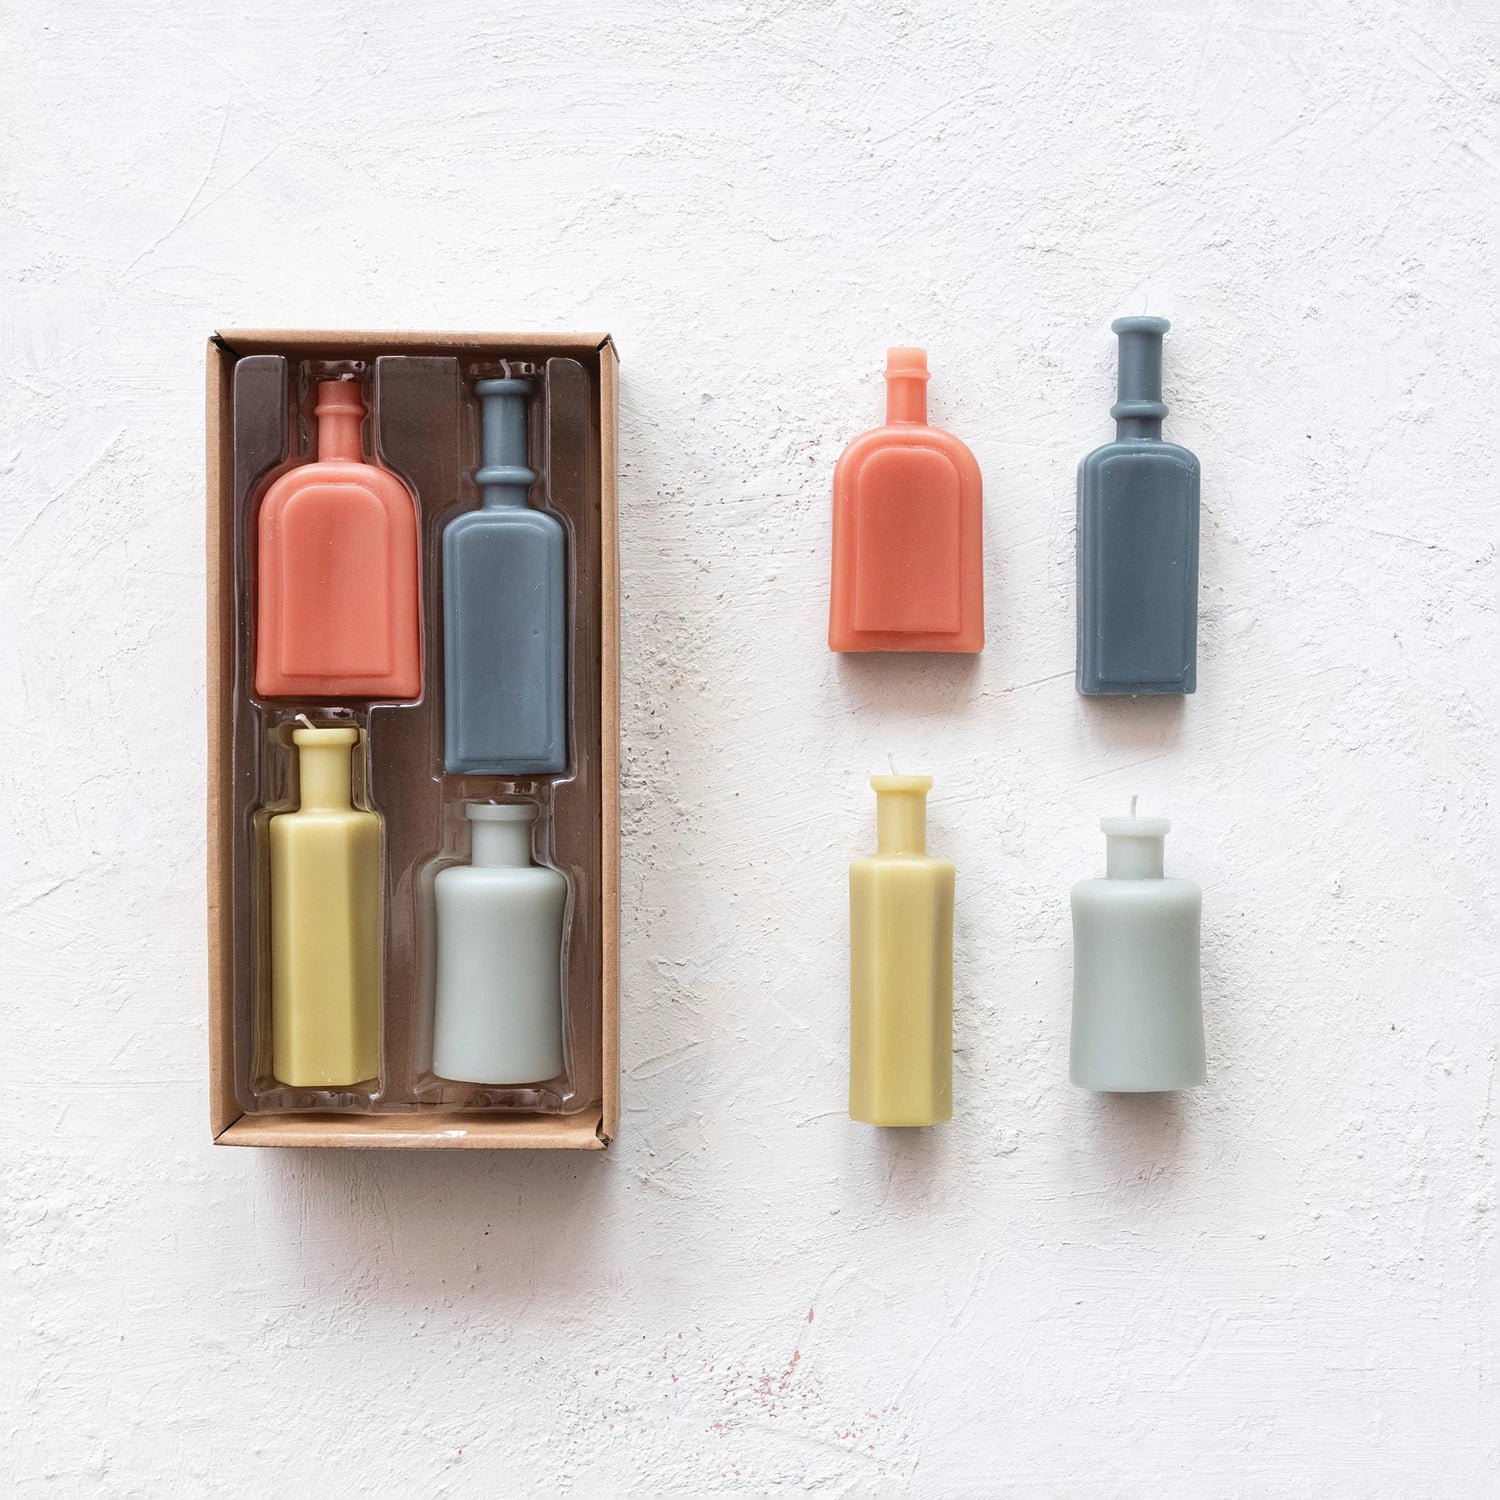 boxed set and unboxed set of vintage bottle shaped candles on a plaster background.